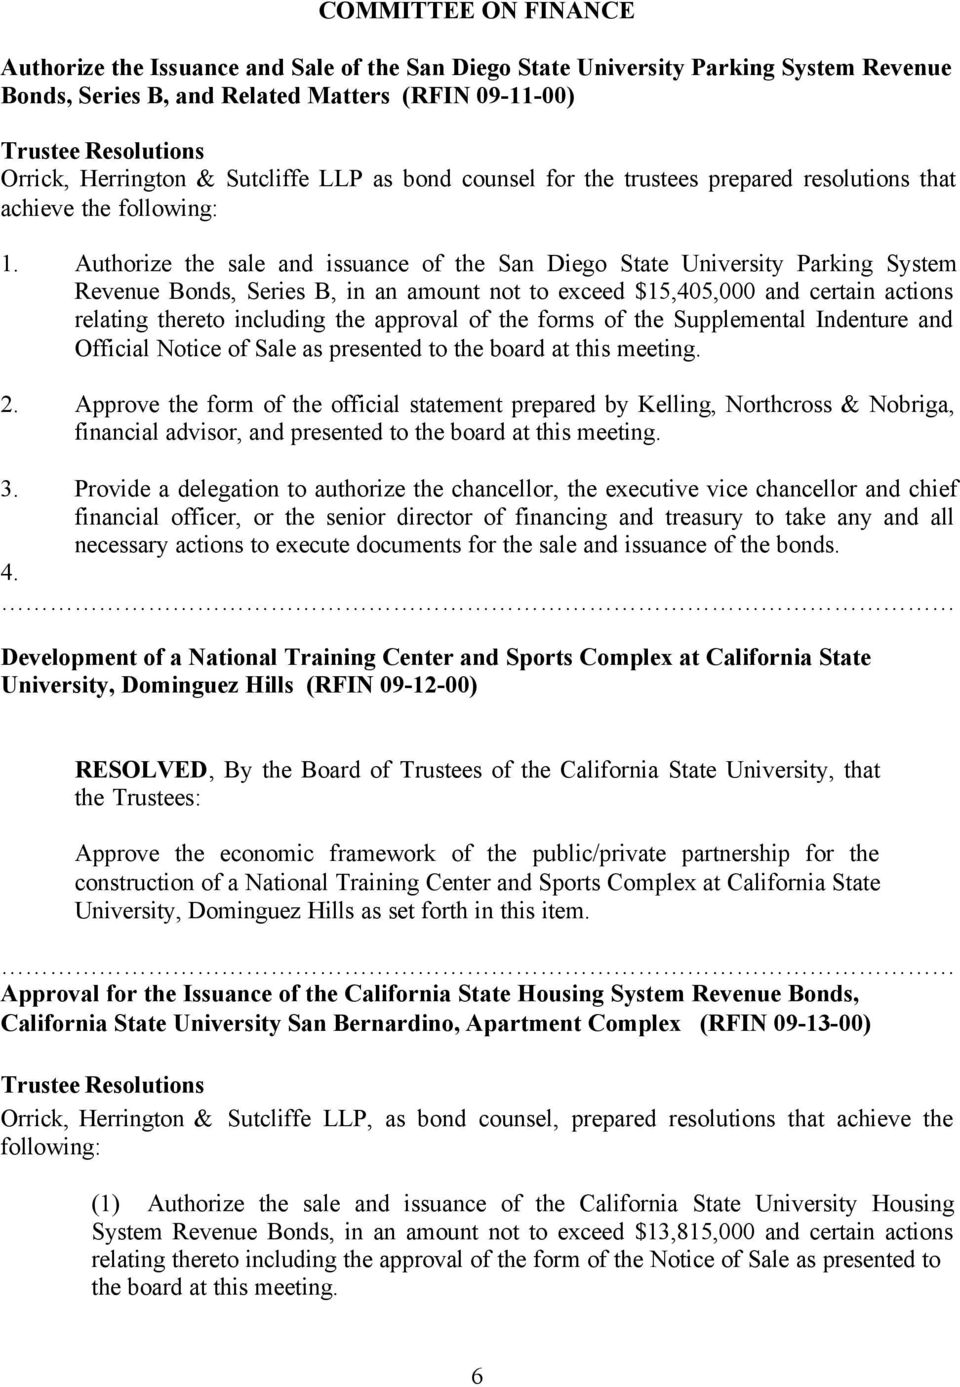 Authorize the sale and issuance of the San Diego State University Parking System Revenue Bonds, Series B, in an amount not to exceed $15,405,000 and certain actions relating thereto including the